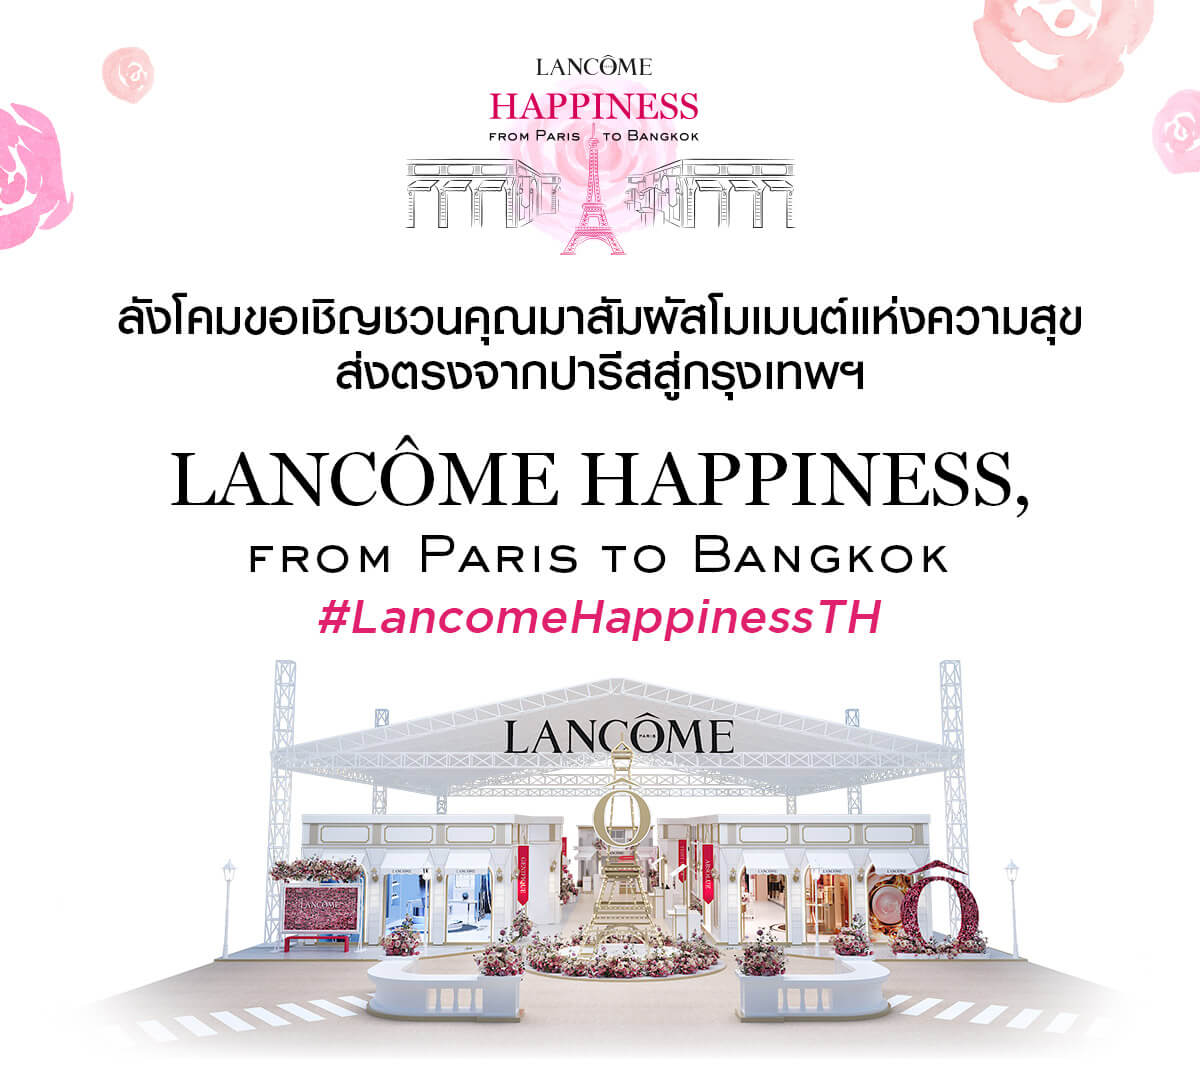 Lancôme Happiness From Paris To Bangkok #lancomehappinessth